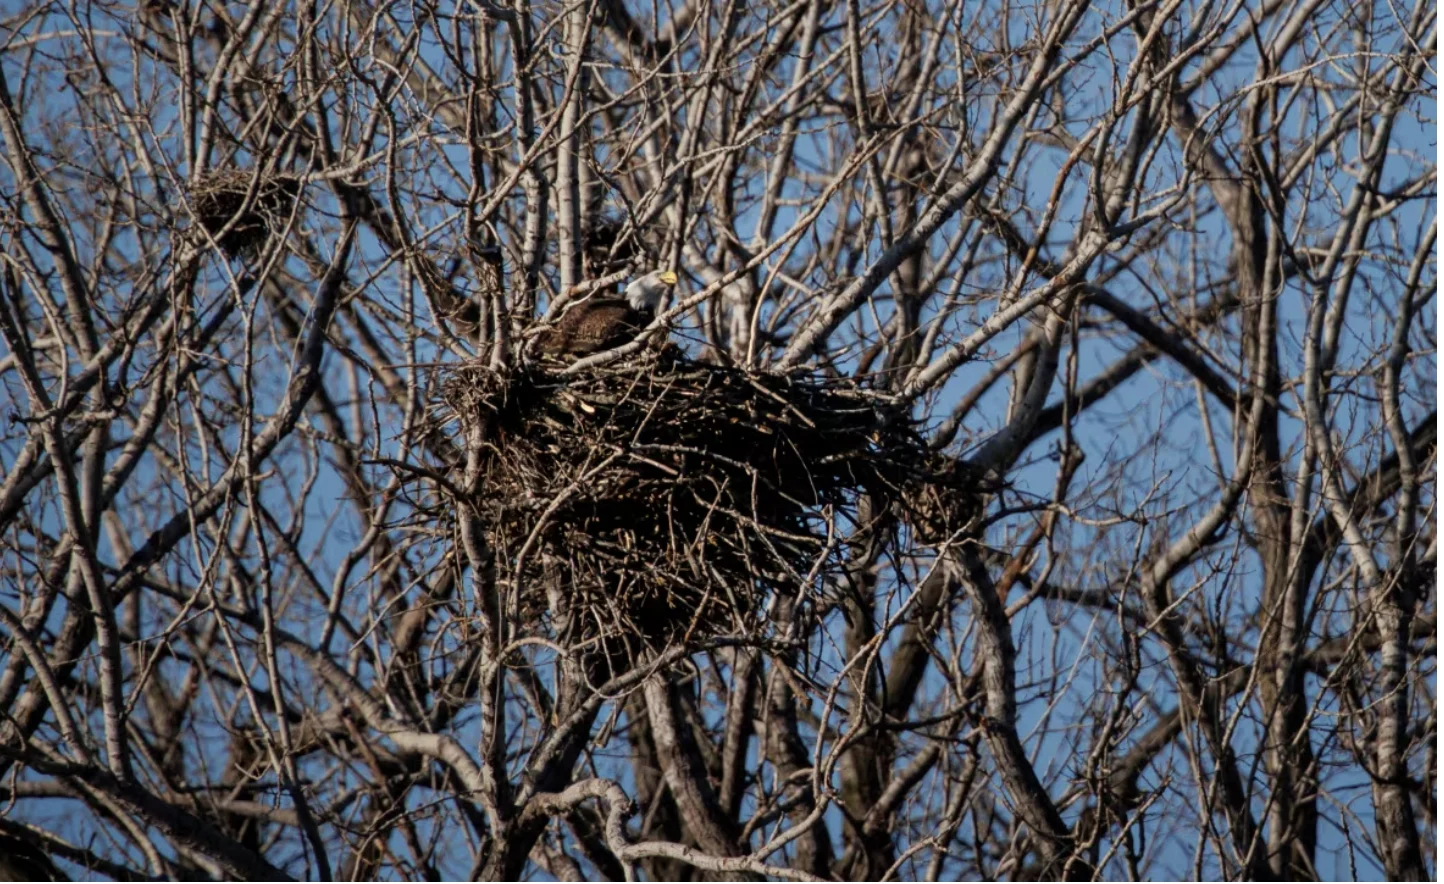 CBC: TRCA has been carefully observing the nest through a spotting scope. There are two eaglets who both seem to be doing well. (Evan Mitsui/CBC)